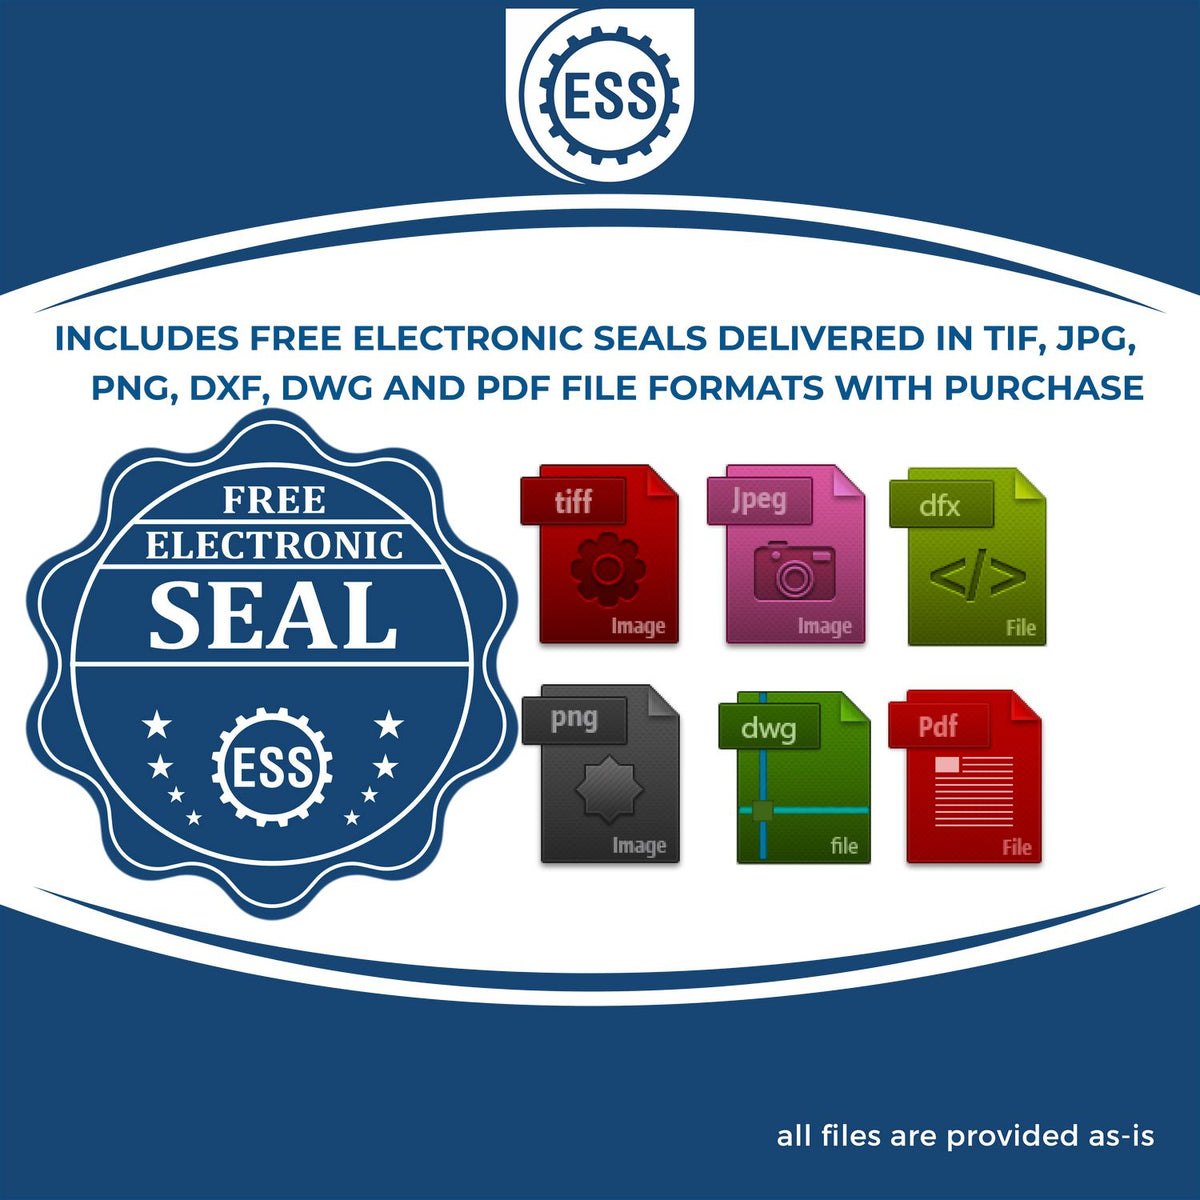 An infographic for the free electronic seal for the Gift Florida Engineer Seal illustrating the different file type icons such as DXF, DWG, TIF, JPG and PNG.